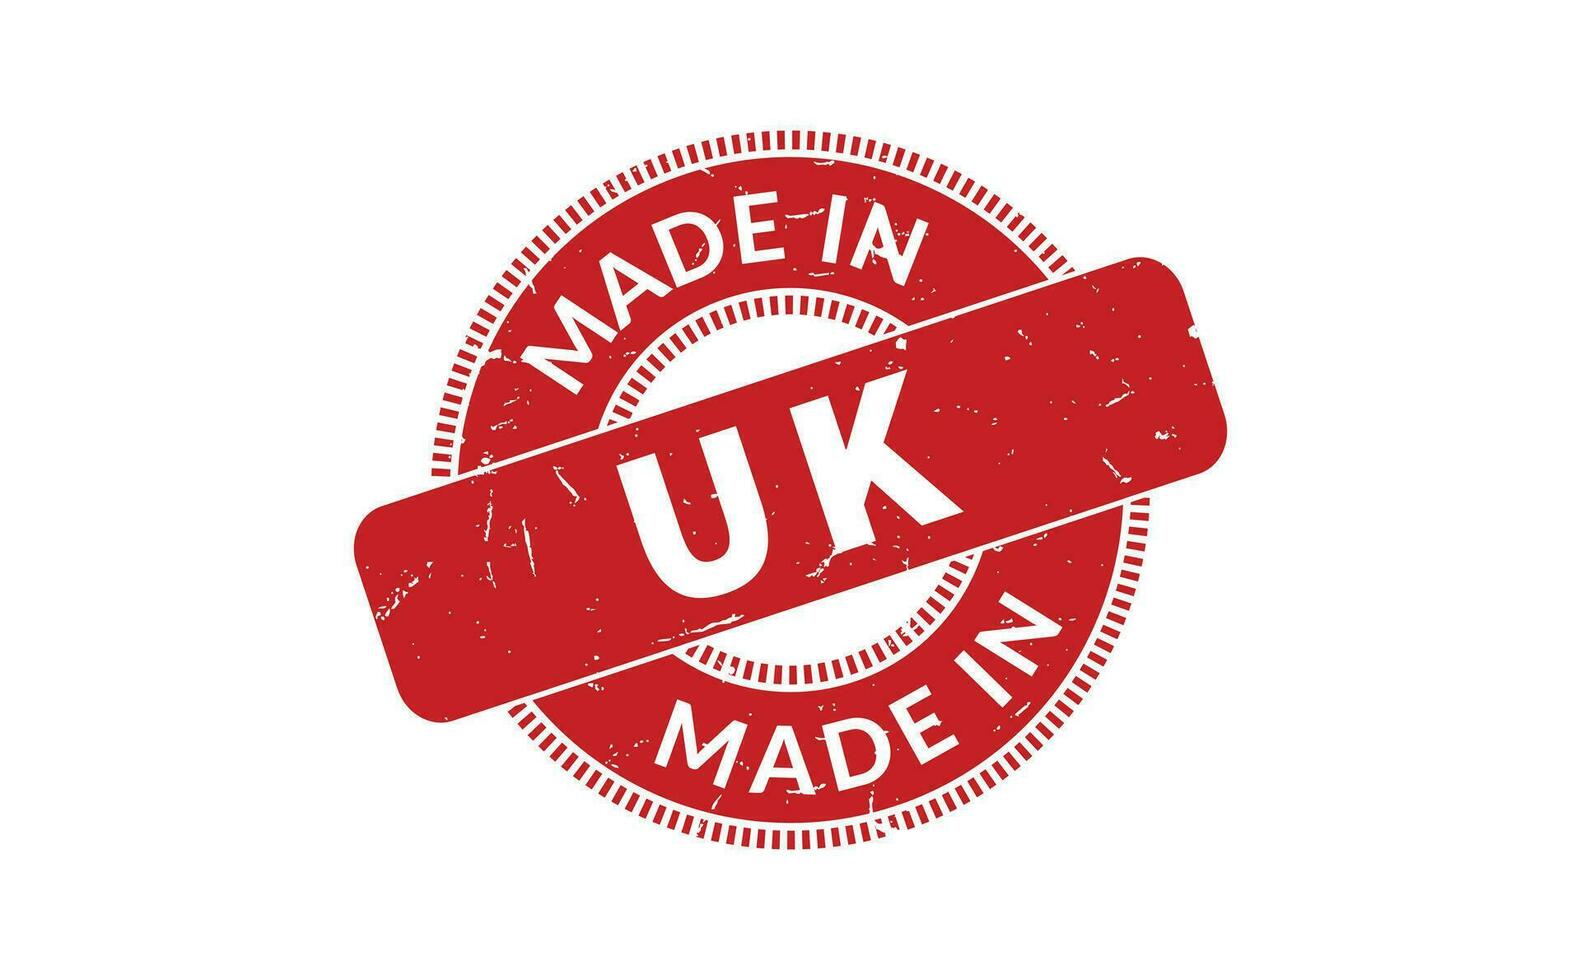 Made In UK Rubber Stamp vector